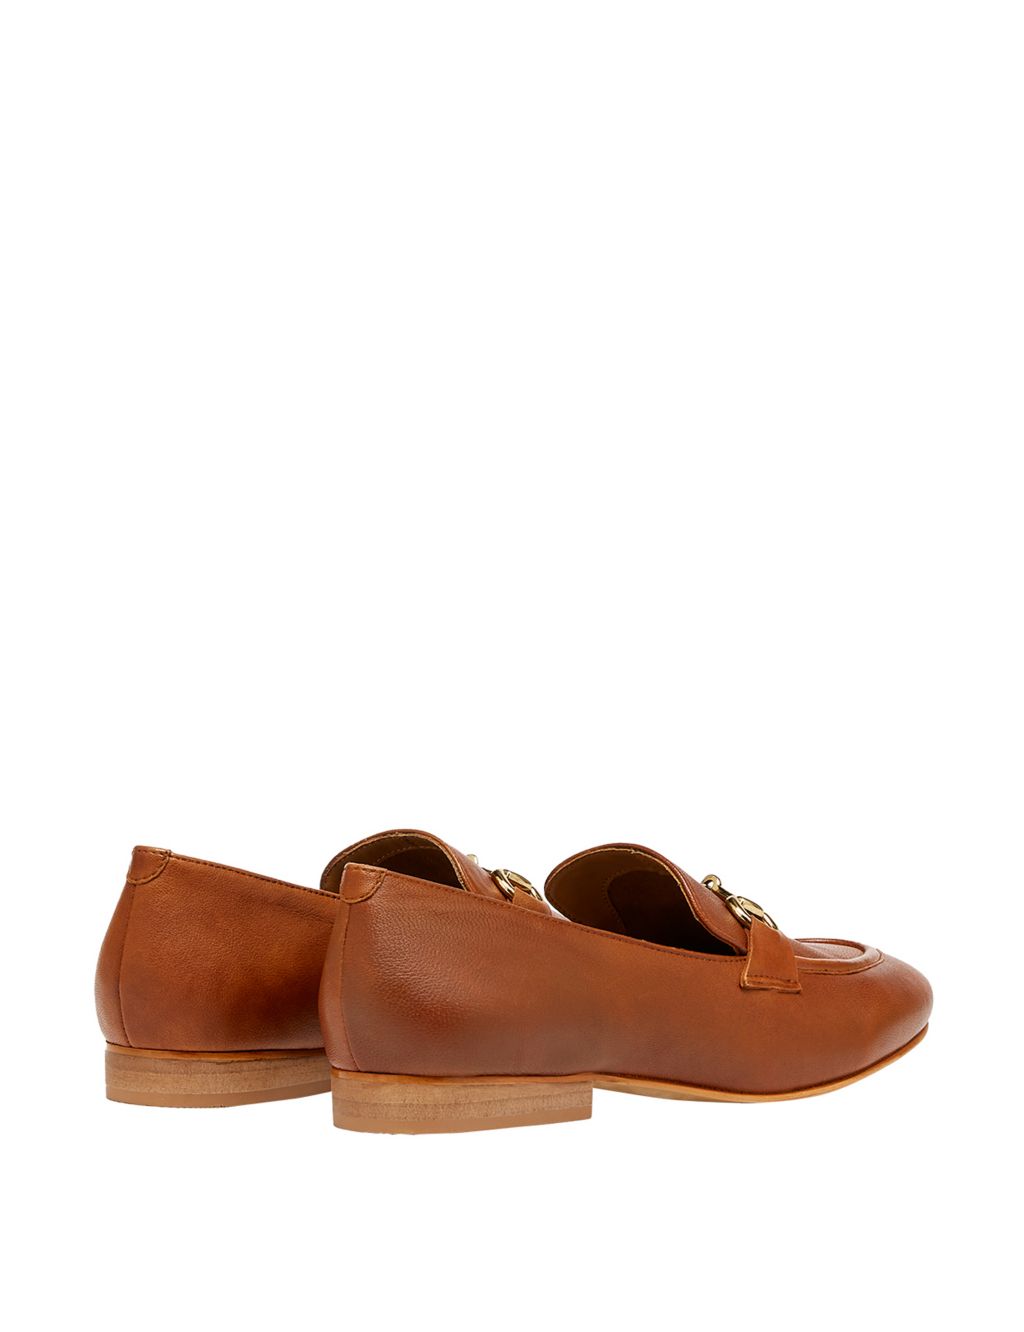 Leather Bar Flat Loafers image 4